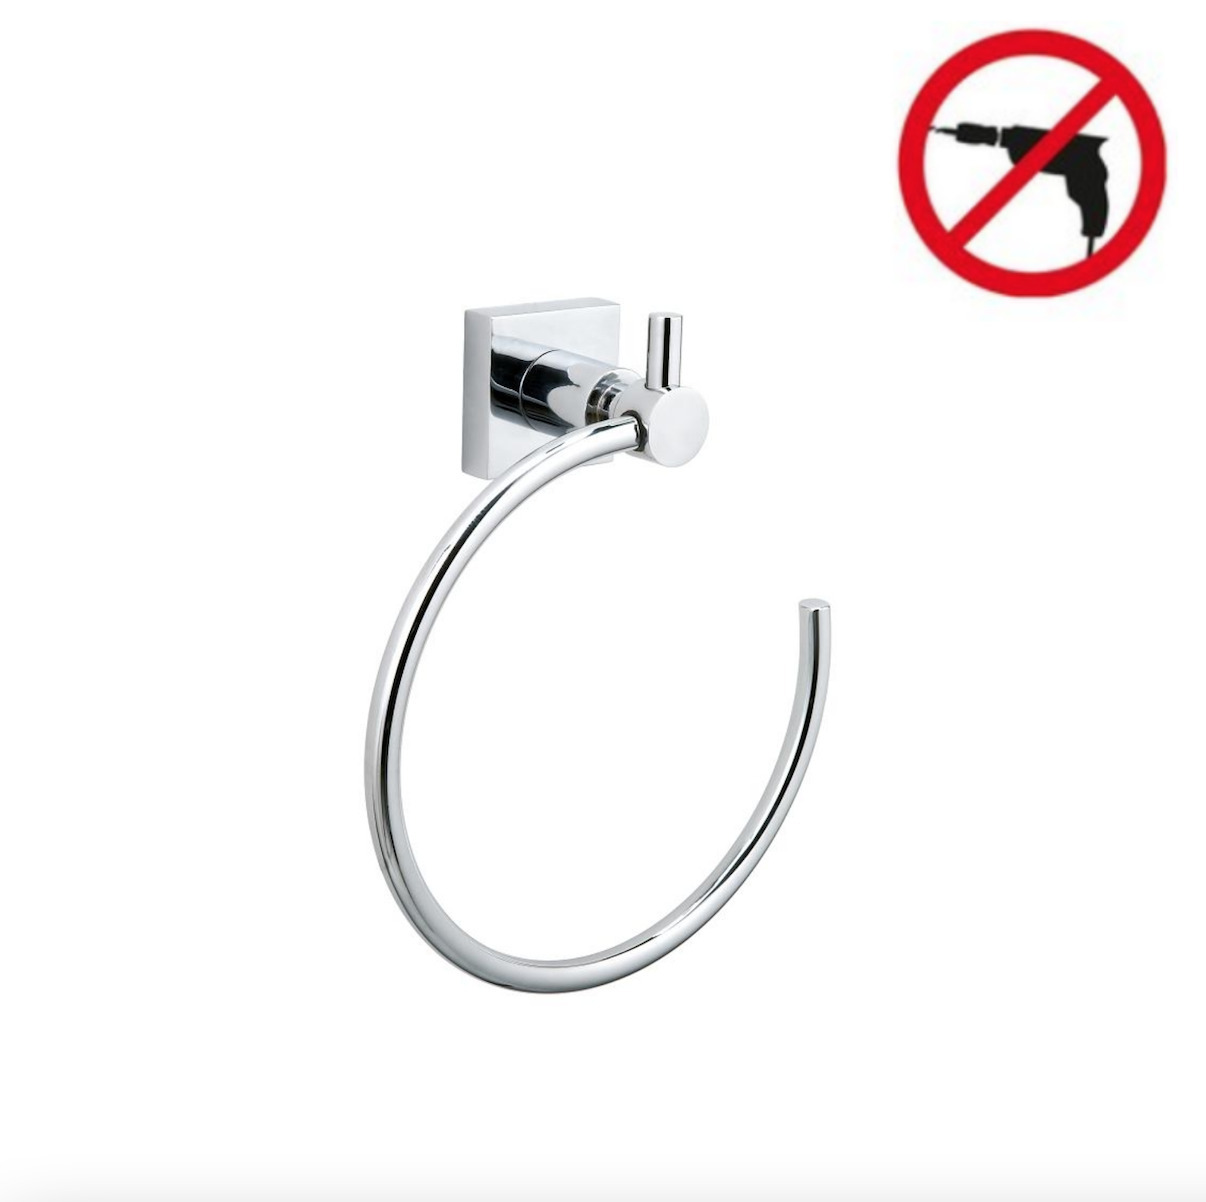 tesa Ekkro No Drill Removable Adhesive Glue Technology Chrome-plated Metal Wall Mounted Towel Ring 